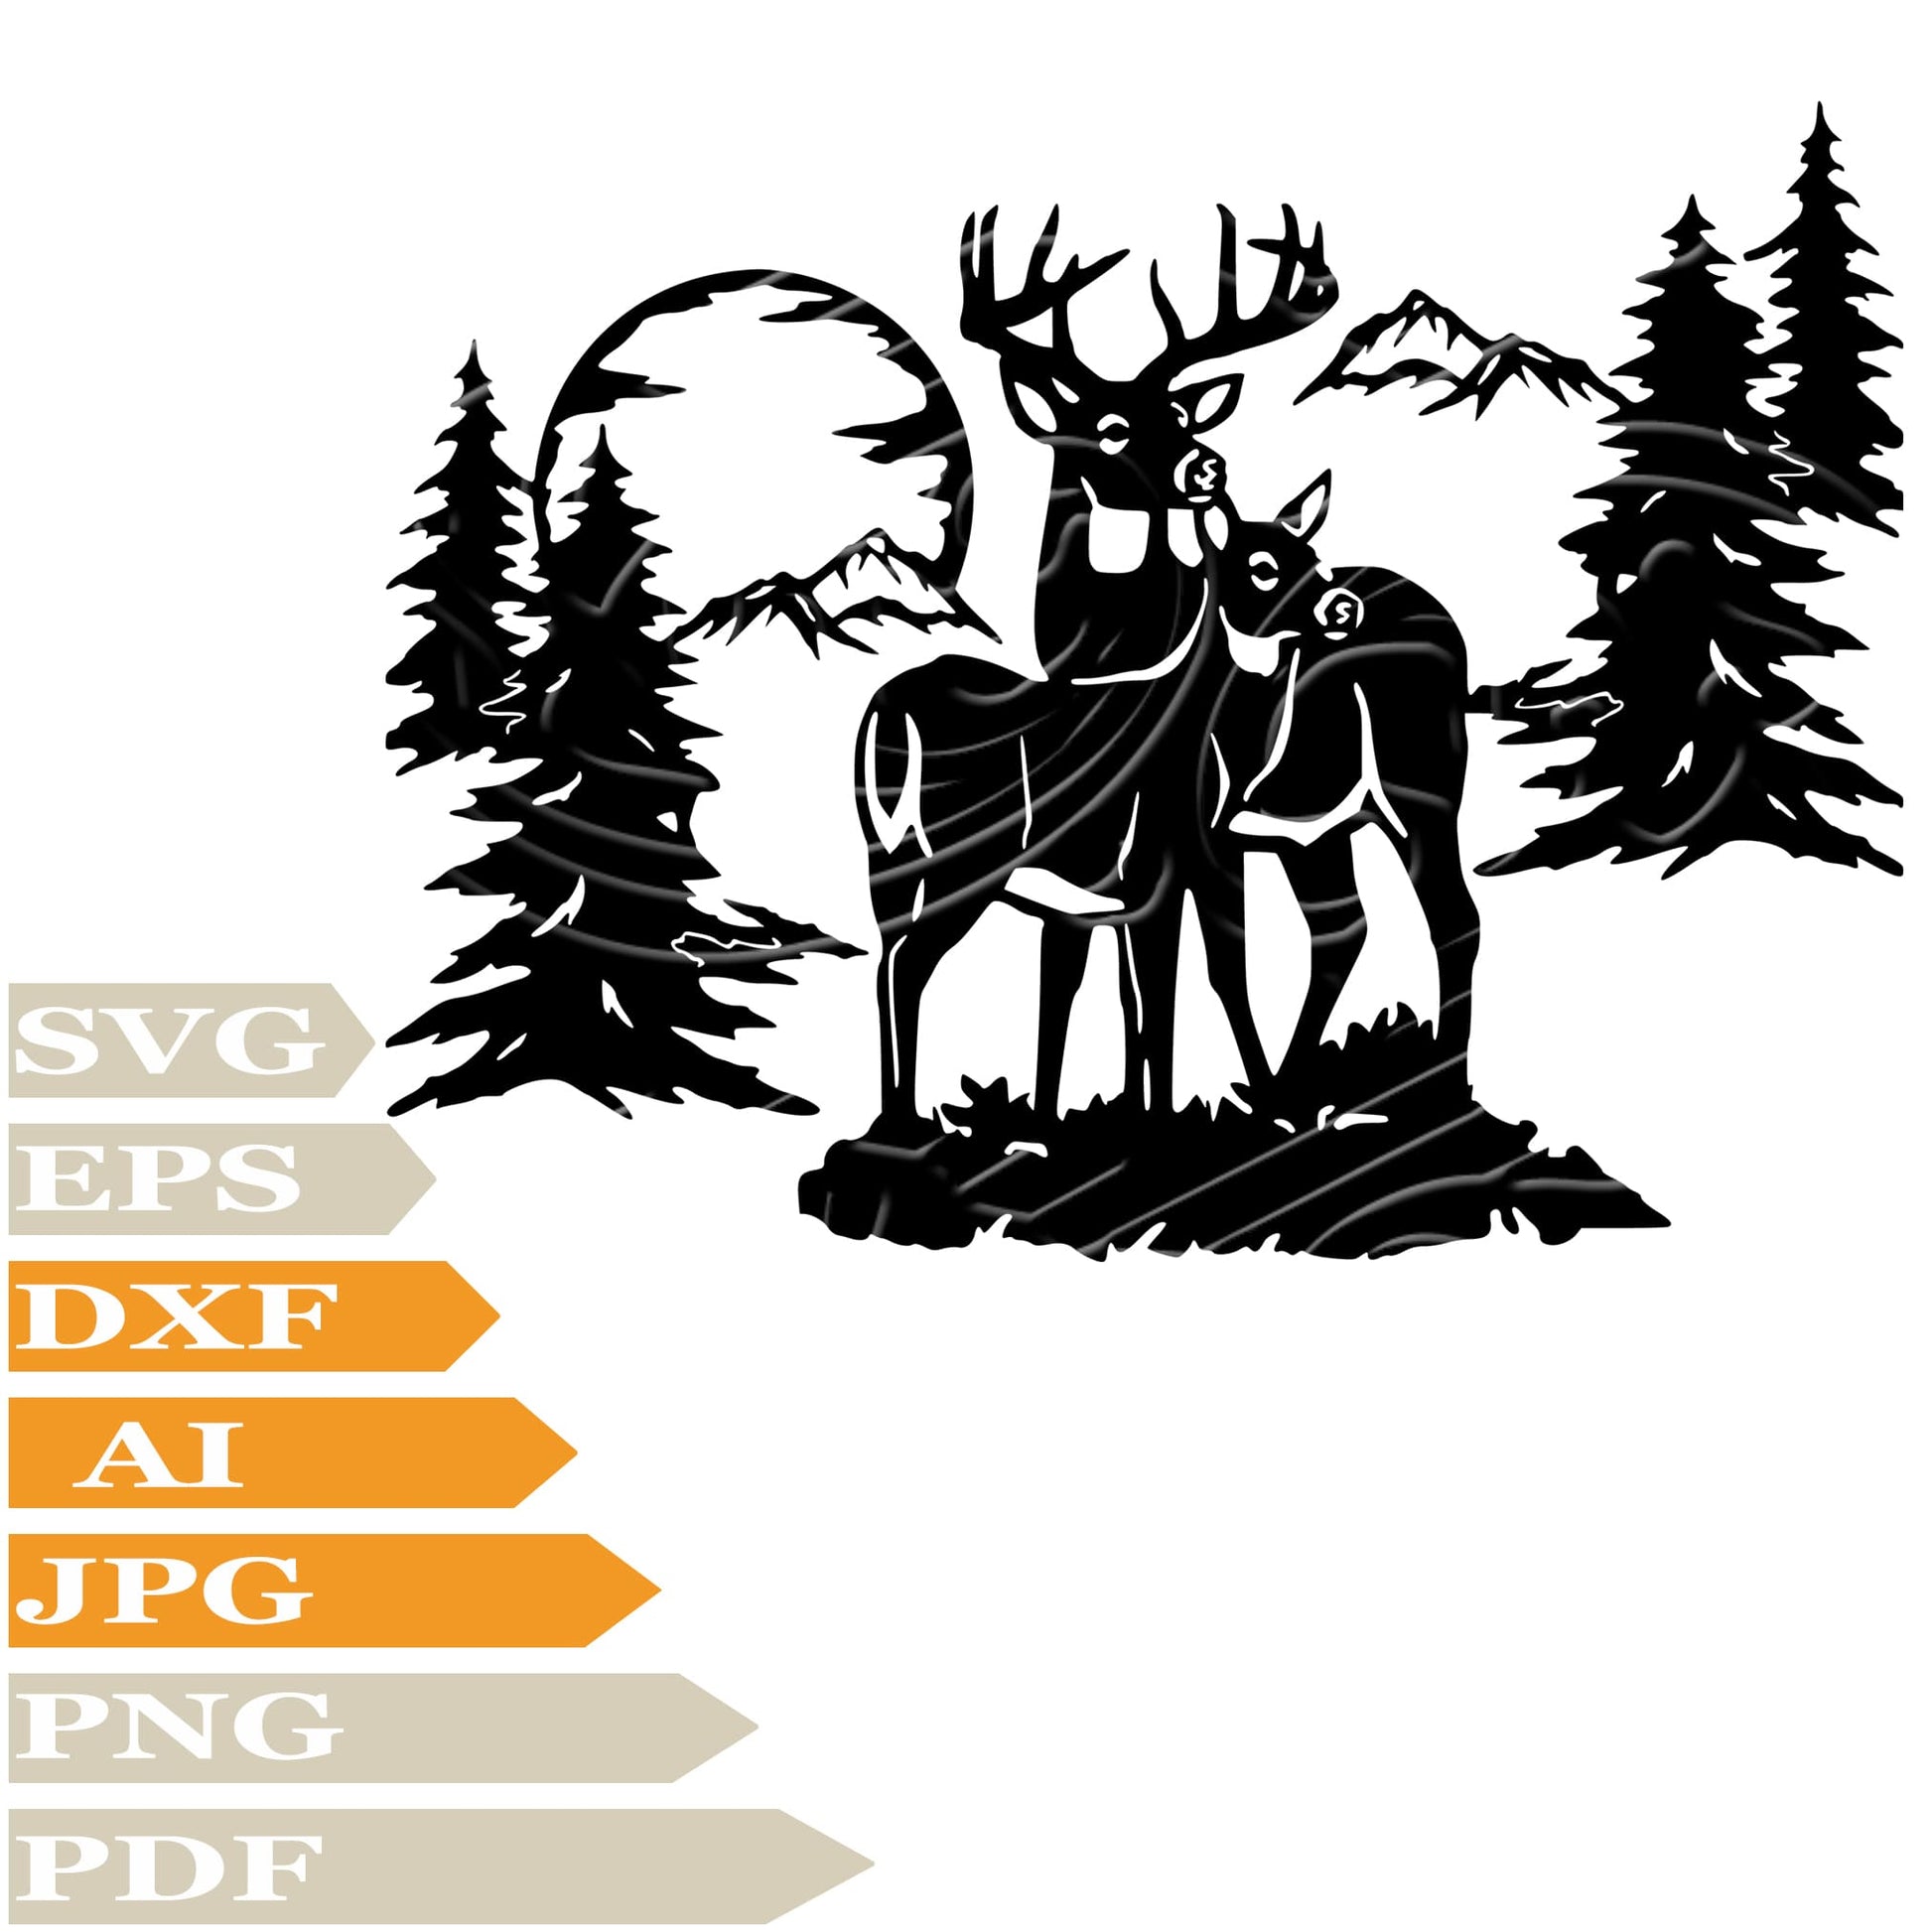 Deer, Deers In Forest Svg File, Image Cut, Png, For Tattoo, Silhouette, Digital Vector Download, Cut File, Clipart, For Cricut